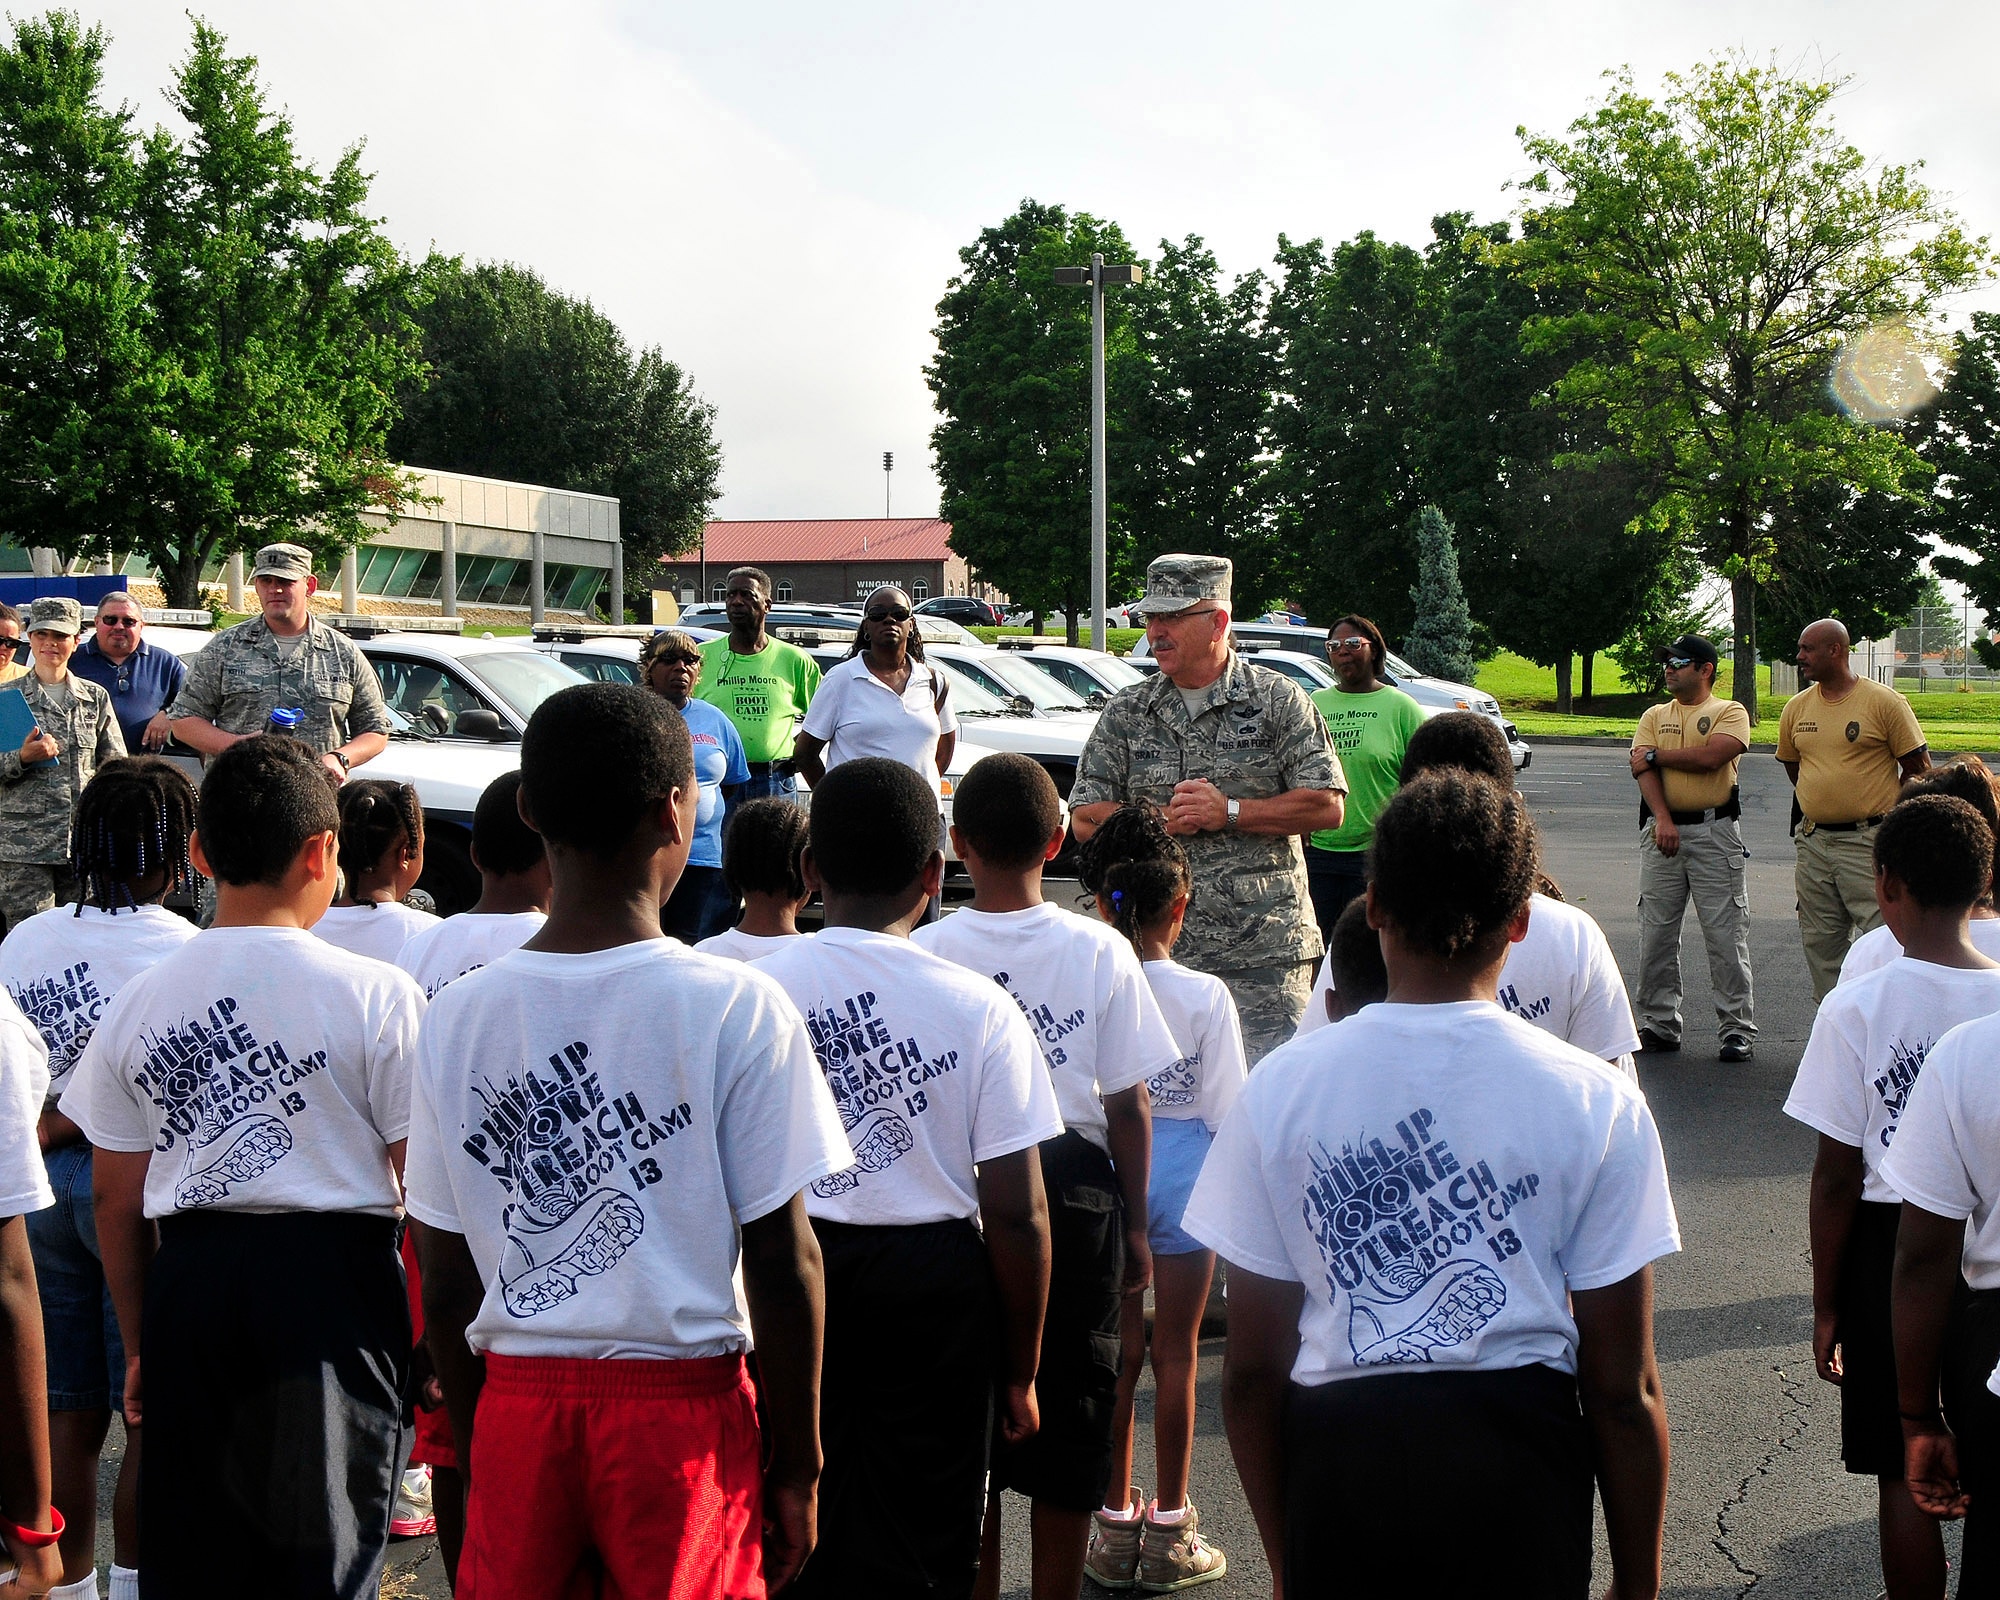 Col Randy Gratz, 134 ARW Vice Commander, speaks to the young members of the Knoxville Police Department Boot Camp Program during their visit to McGhee Tyson ANG Base, Tennessee July 23.  The children are participating in the program to learn opportunities that exist outside of thier local communities. (Air National Guard photo by Master Sgt. Kendra Owenby, 134 ARW Public Affairs)